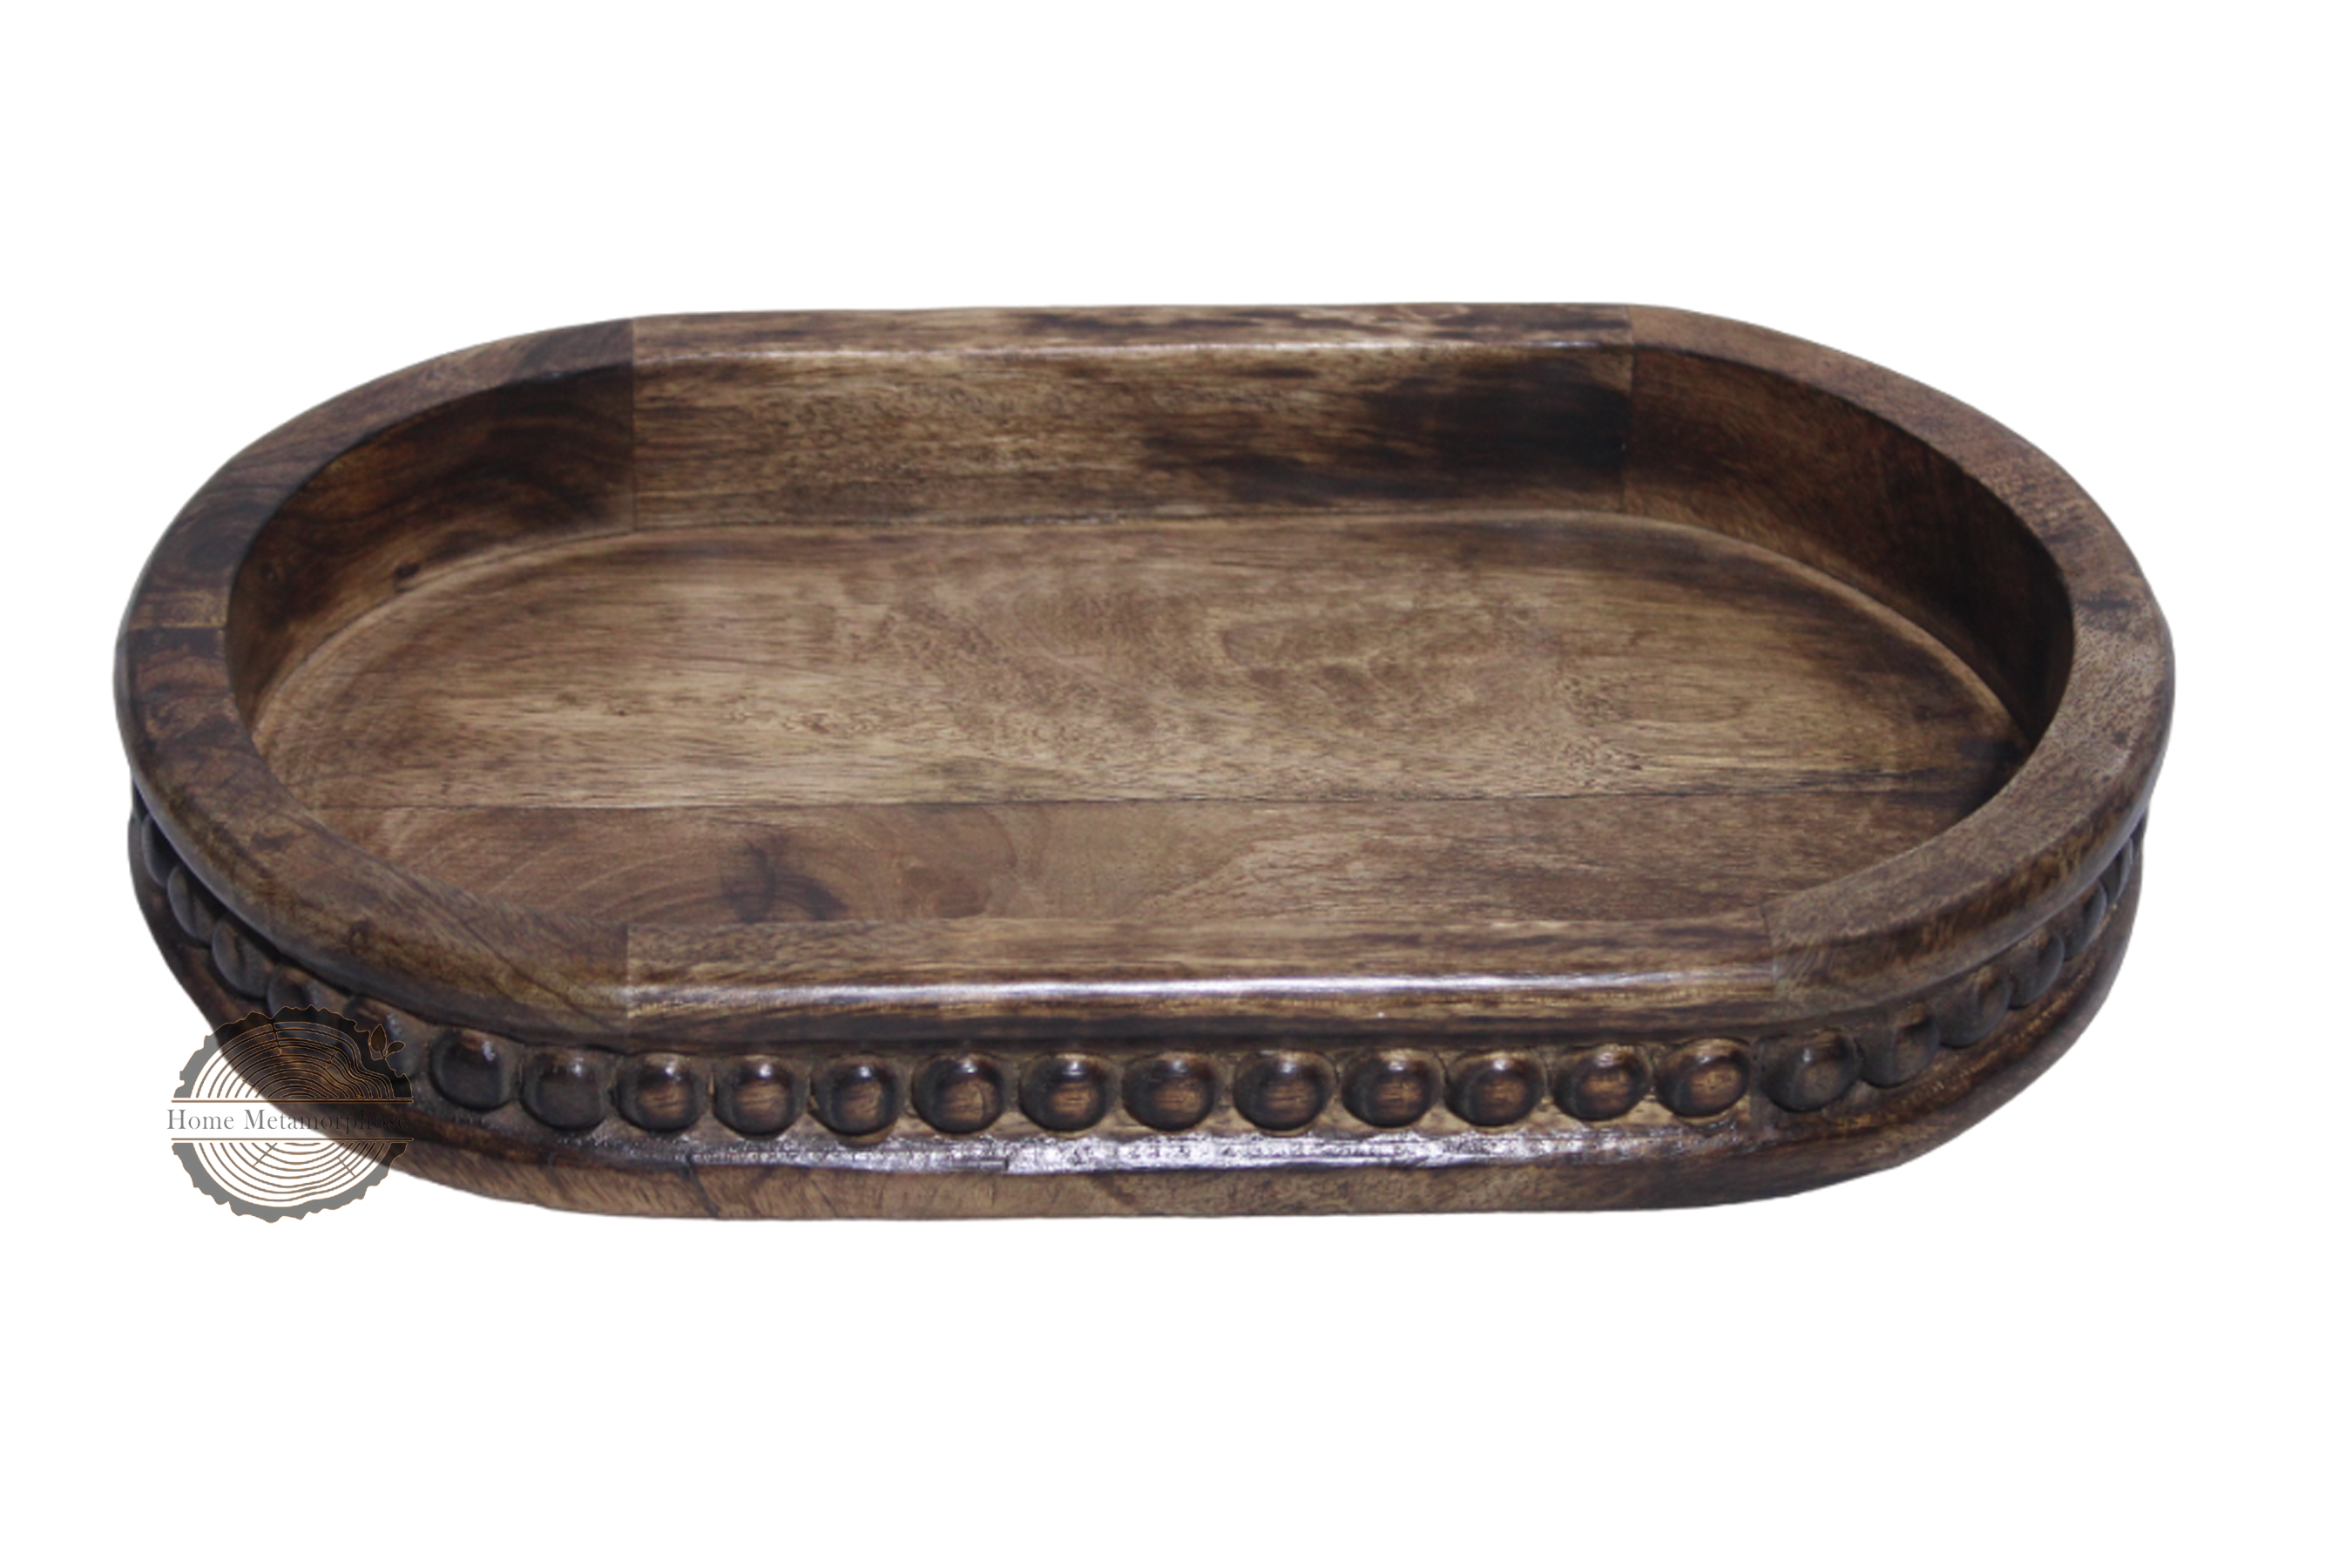 Wooden oval Serving Tray,Couch Tray, Decorative Wooden Serving Tray  Table, Oval Shaped, Oval Wood Serving Tray with Wooden Beads, Outdoor Farmhouse Decorative Tray for Ottoman, Coffee Table, Kitchen Counter Organizer, Home Decor